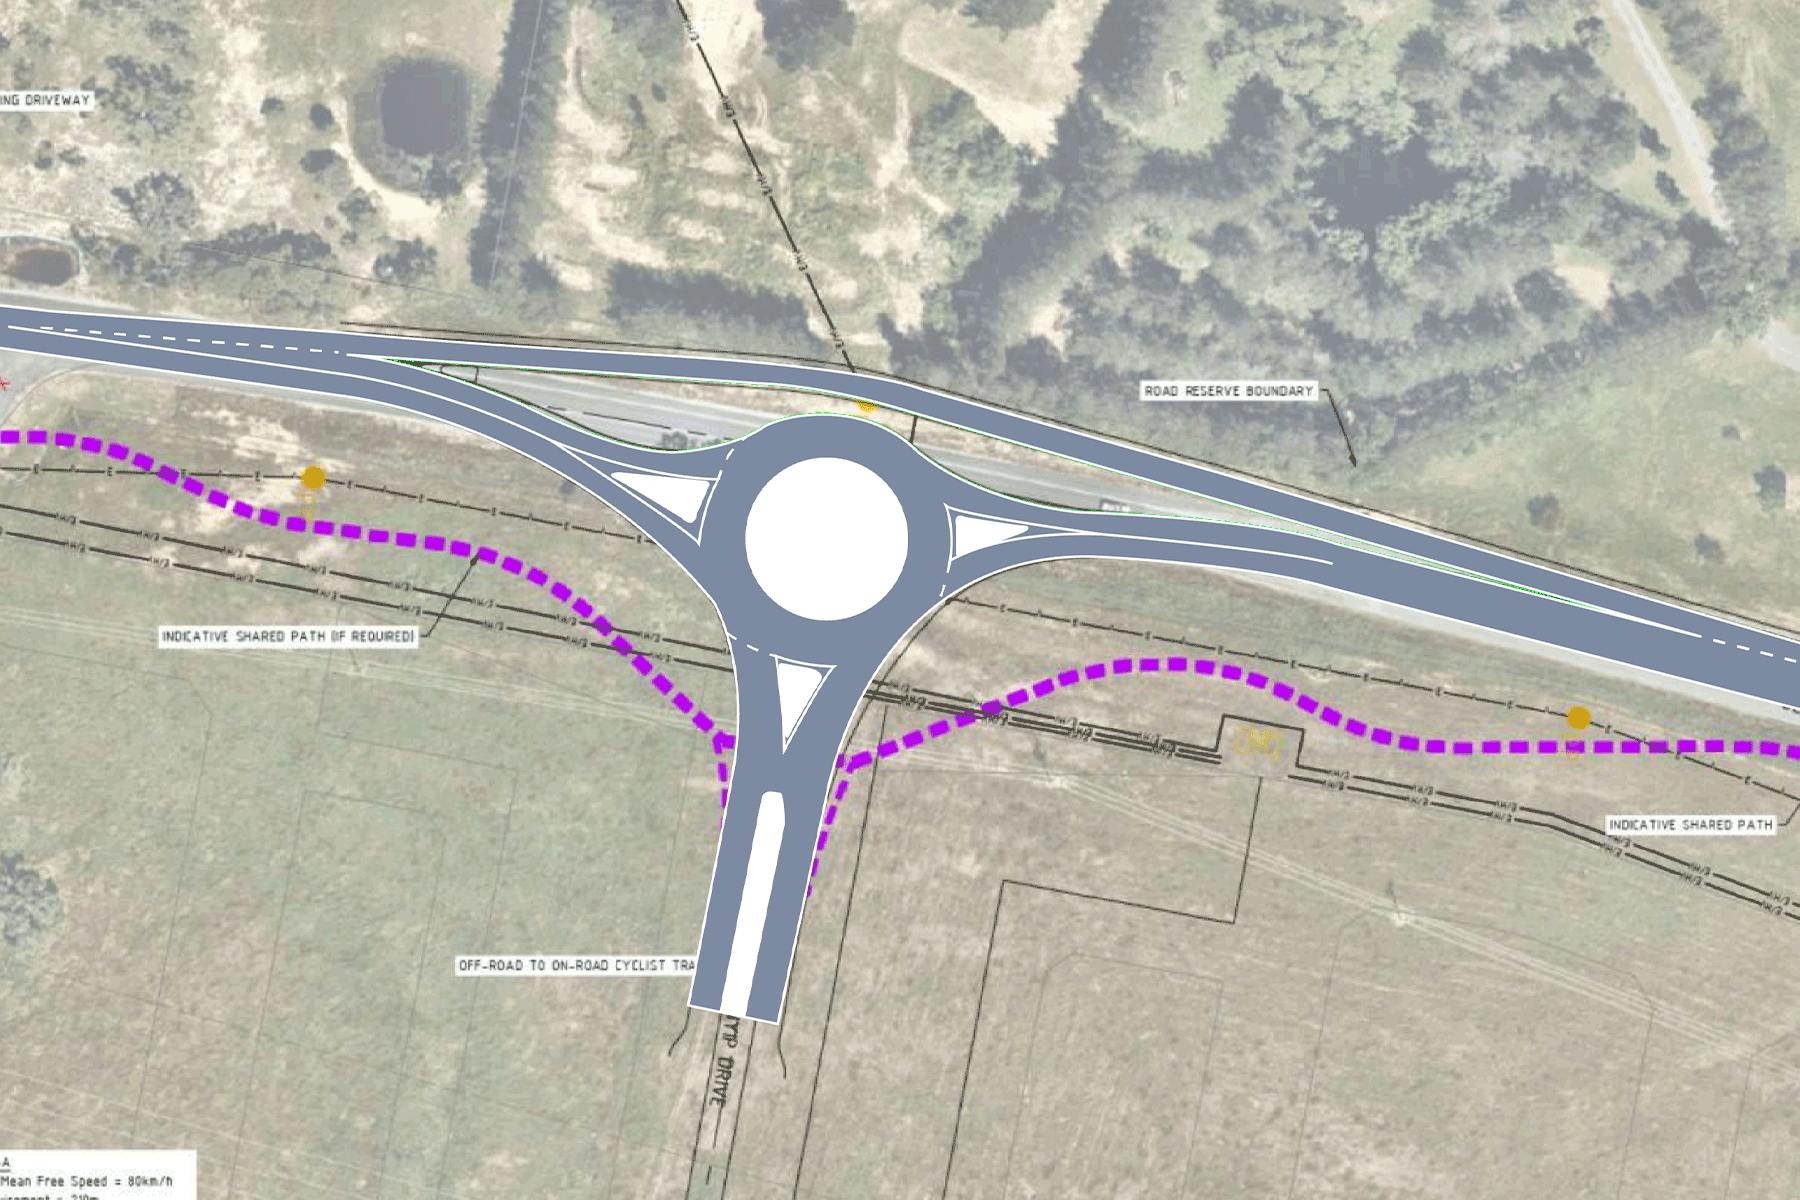 Option 2 - Single lane roundabout with bypass lane heading north towards Queanbeyan